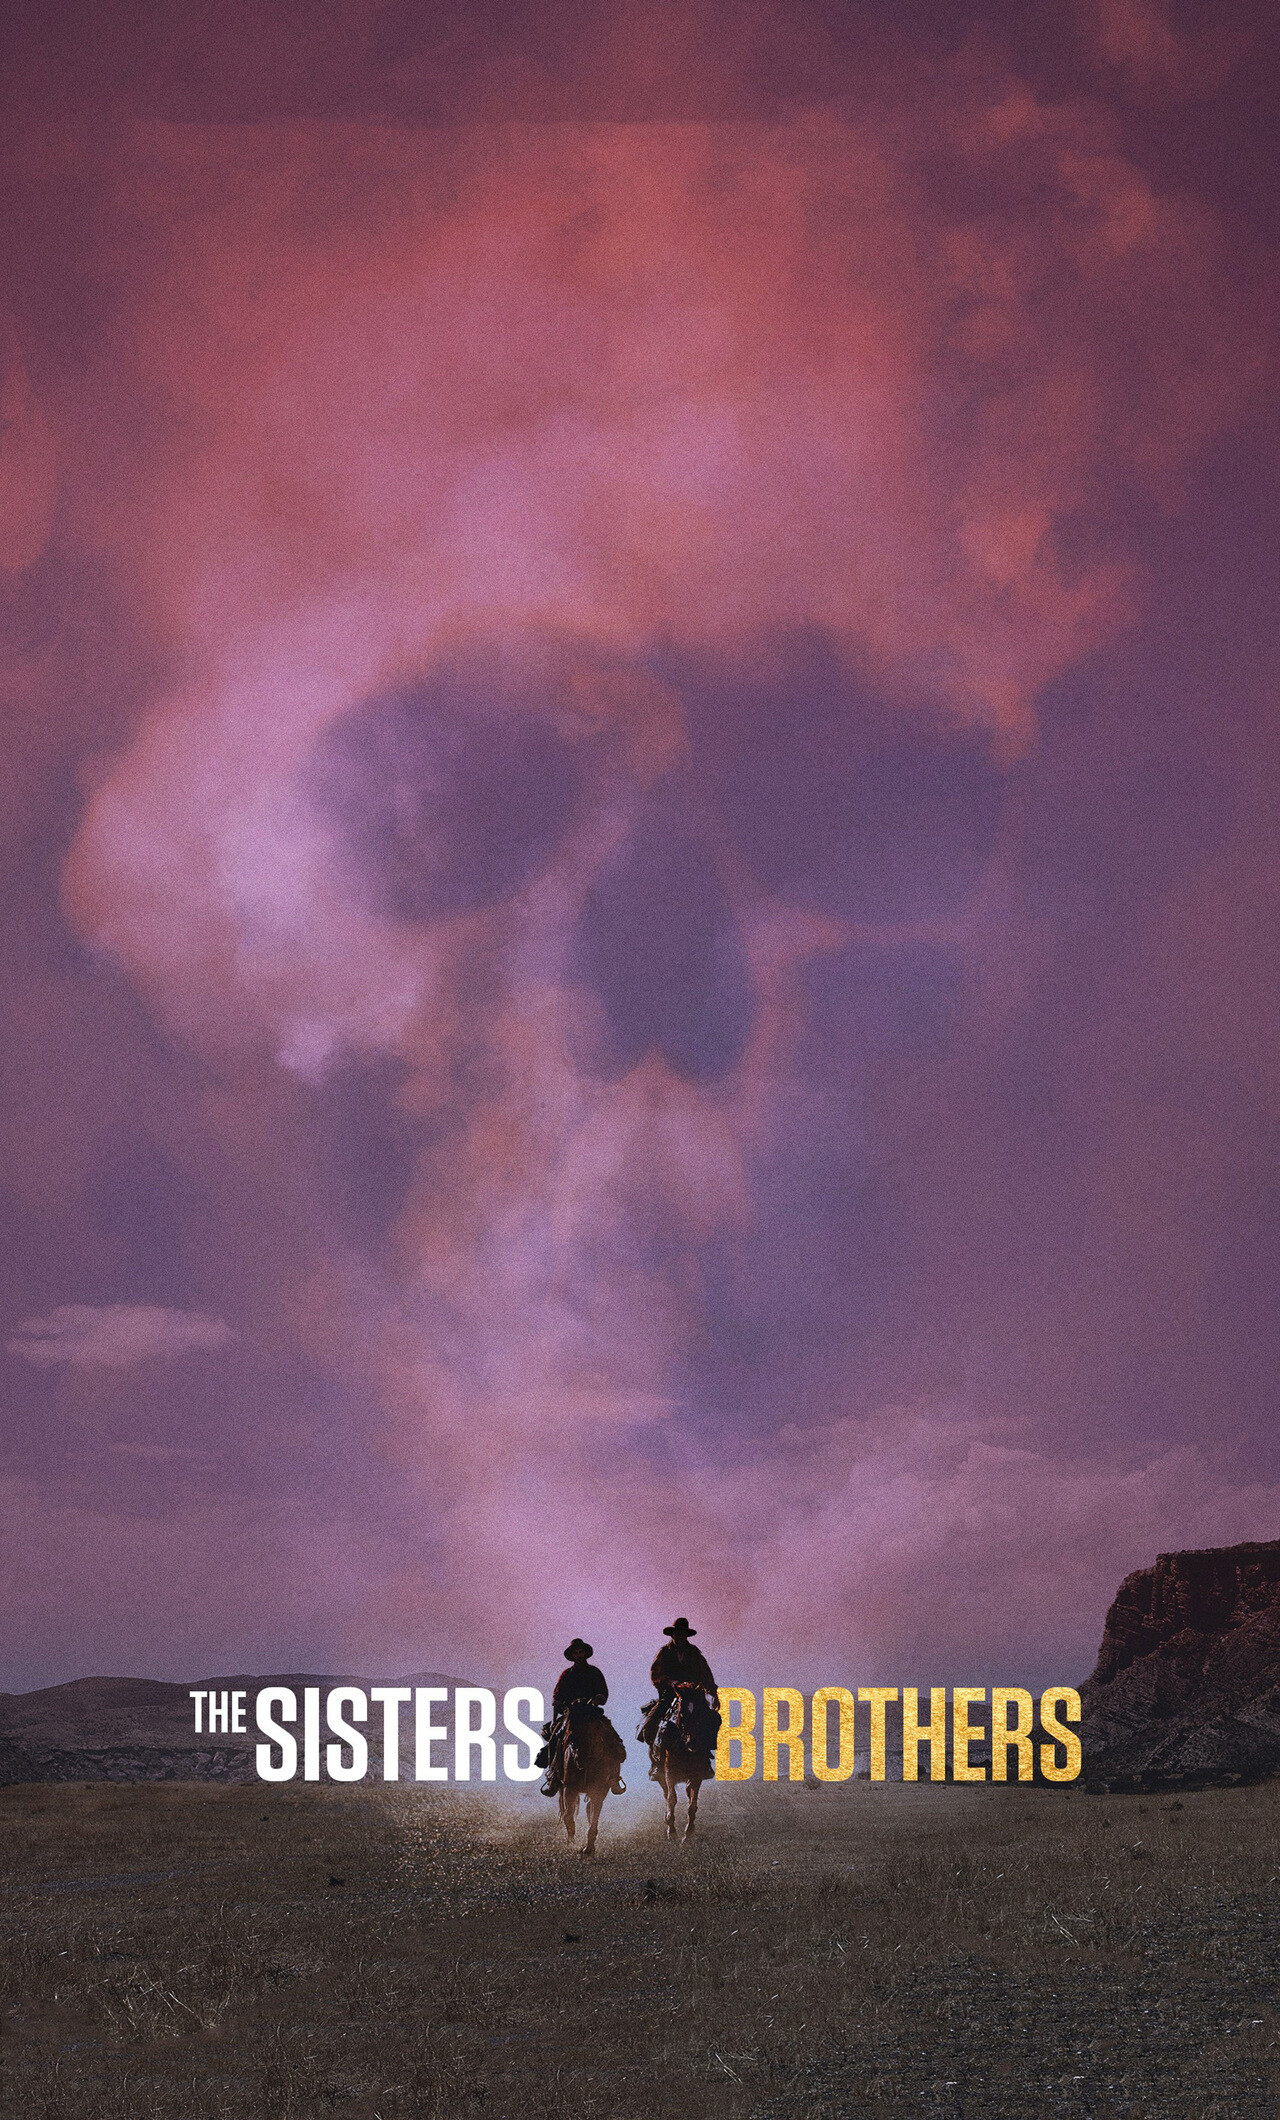 The Sisters Brothers: The film stars John C. Reilly and Joaquin Phoenix as the notorious assassin brothers Eli and Charlie. 1280x2120 HD Wallpaper.